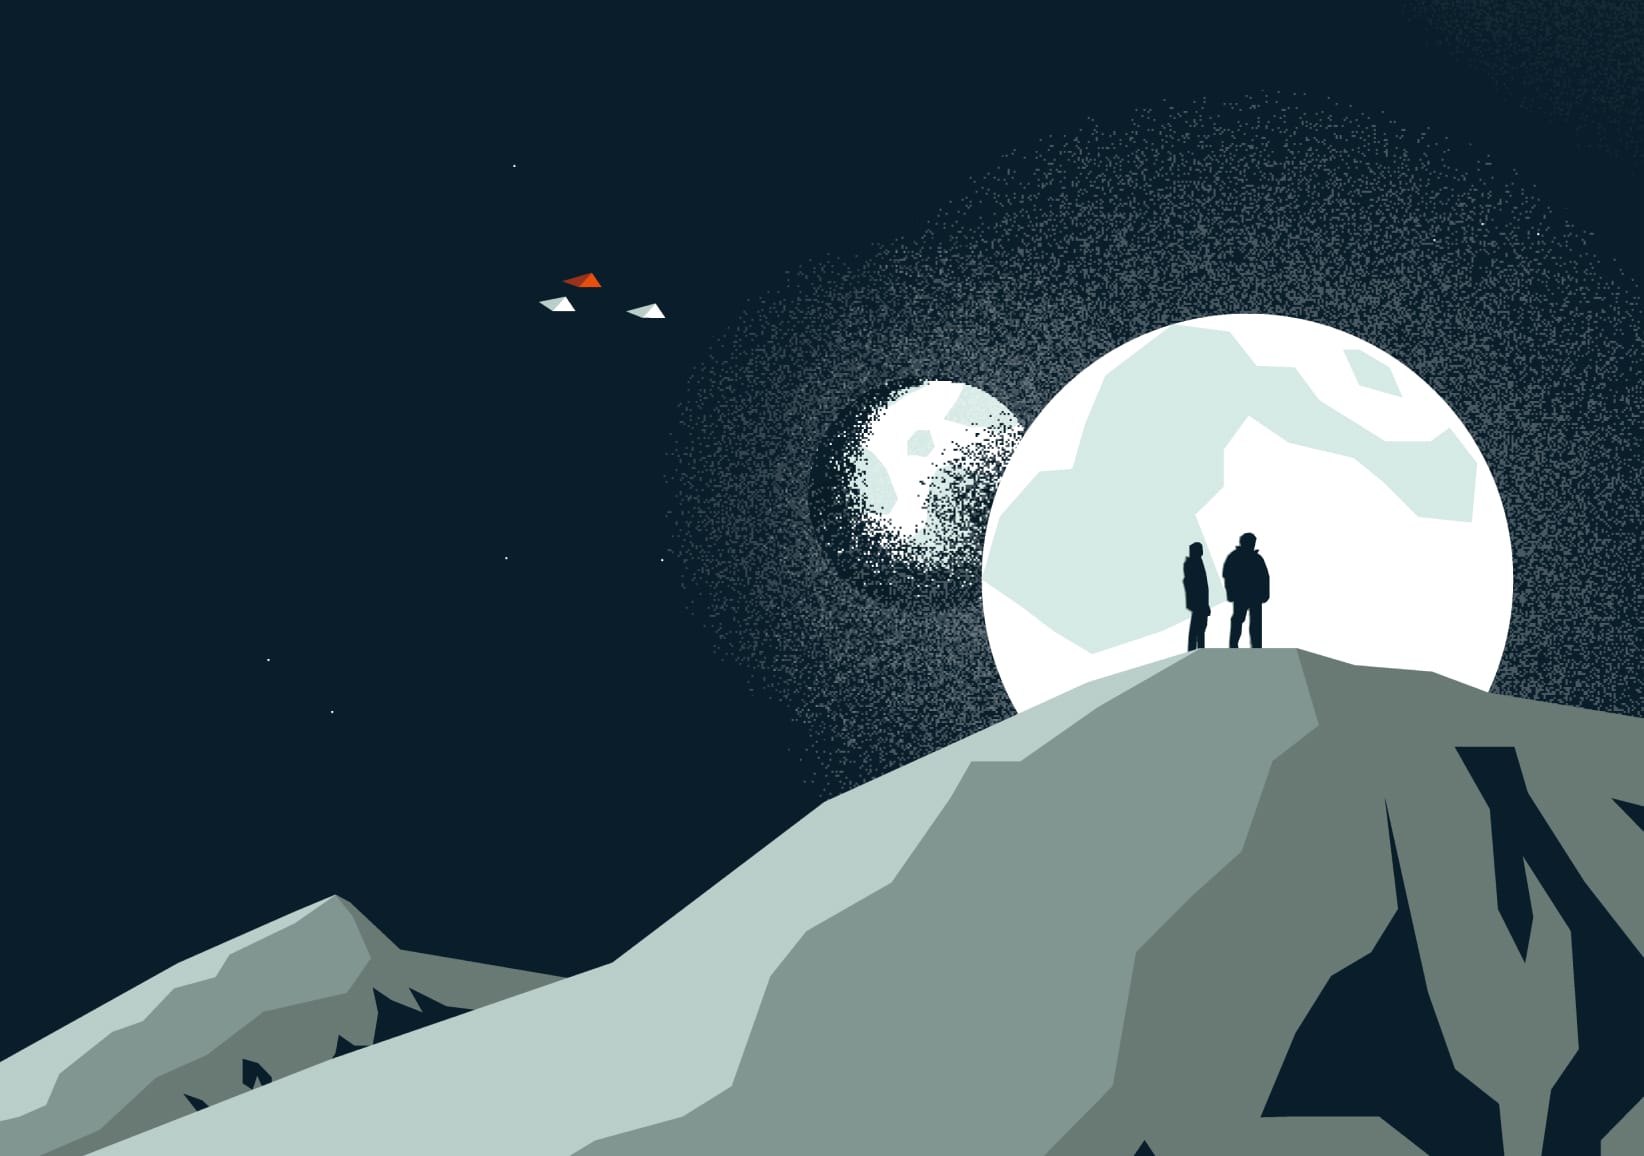 Two people stand on a mountain, silhouetted by the light from a nearby planet and its giant moon. Three spaceships fly overhead.